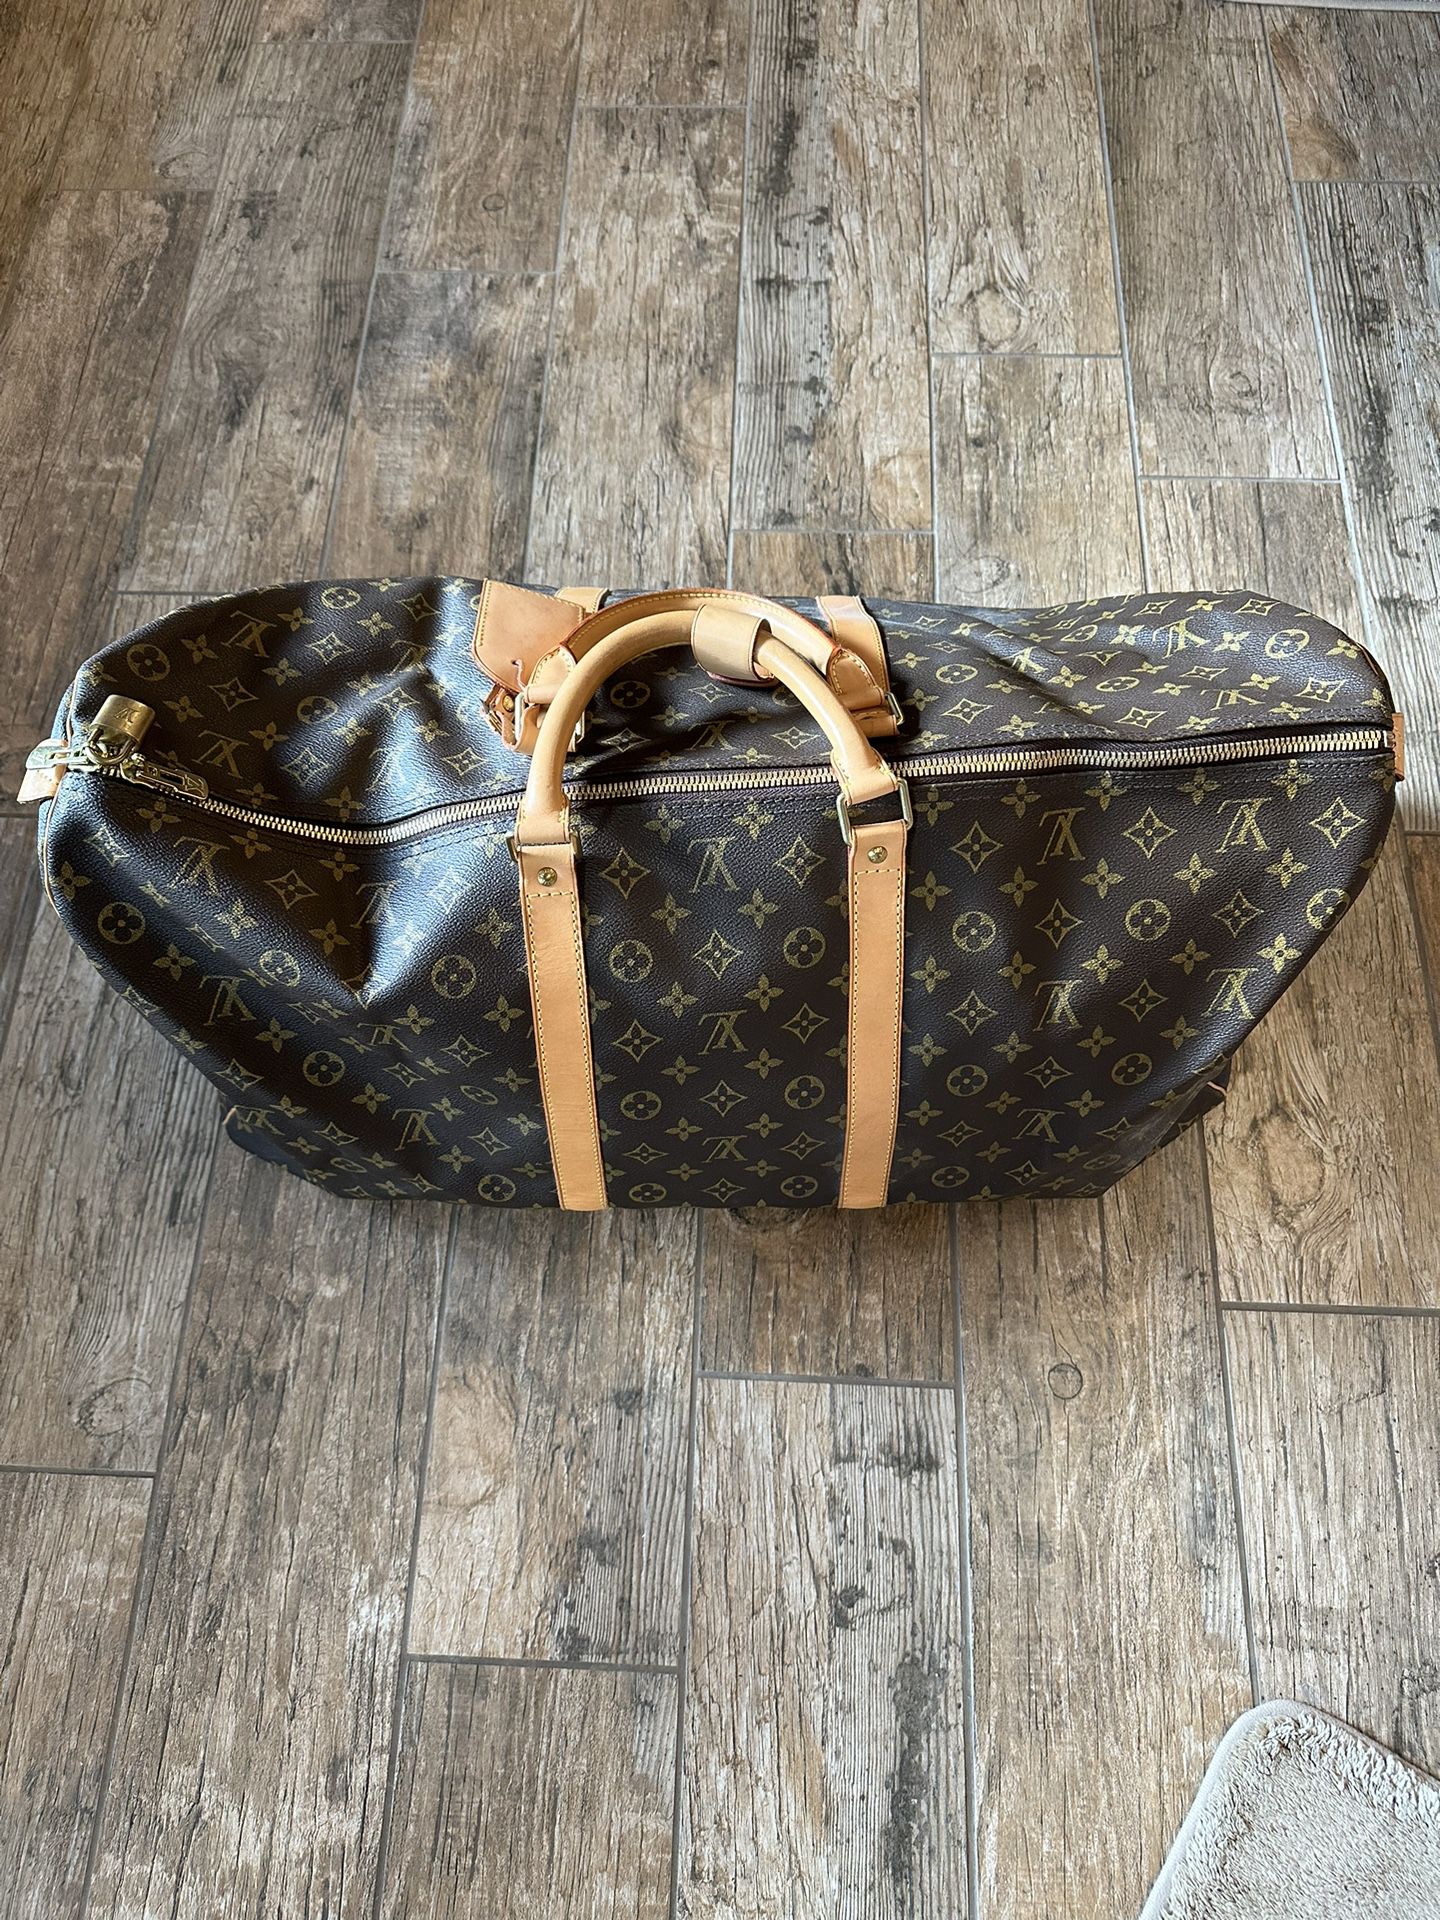 Authentic Louis Vuitton Keepall Duffle Bag for Sale in Irving, TX - OfferUp